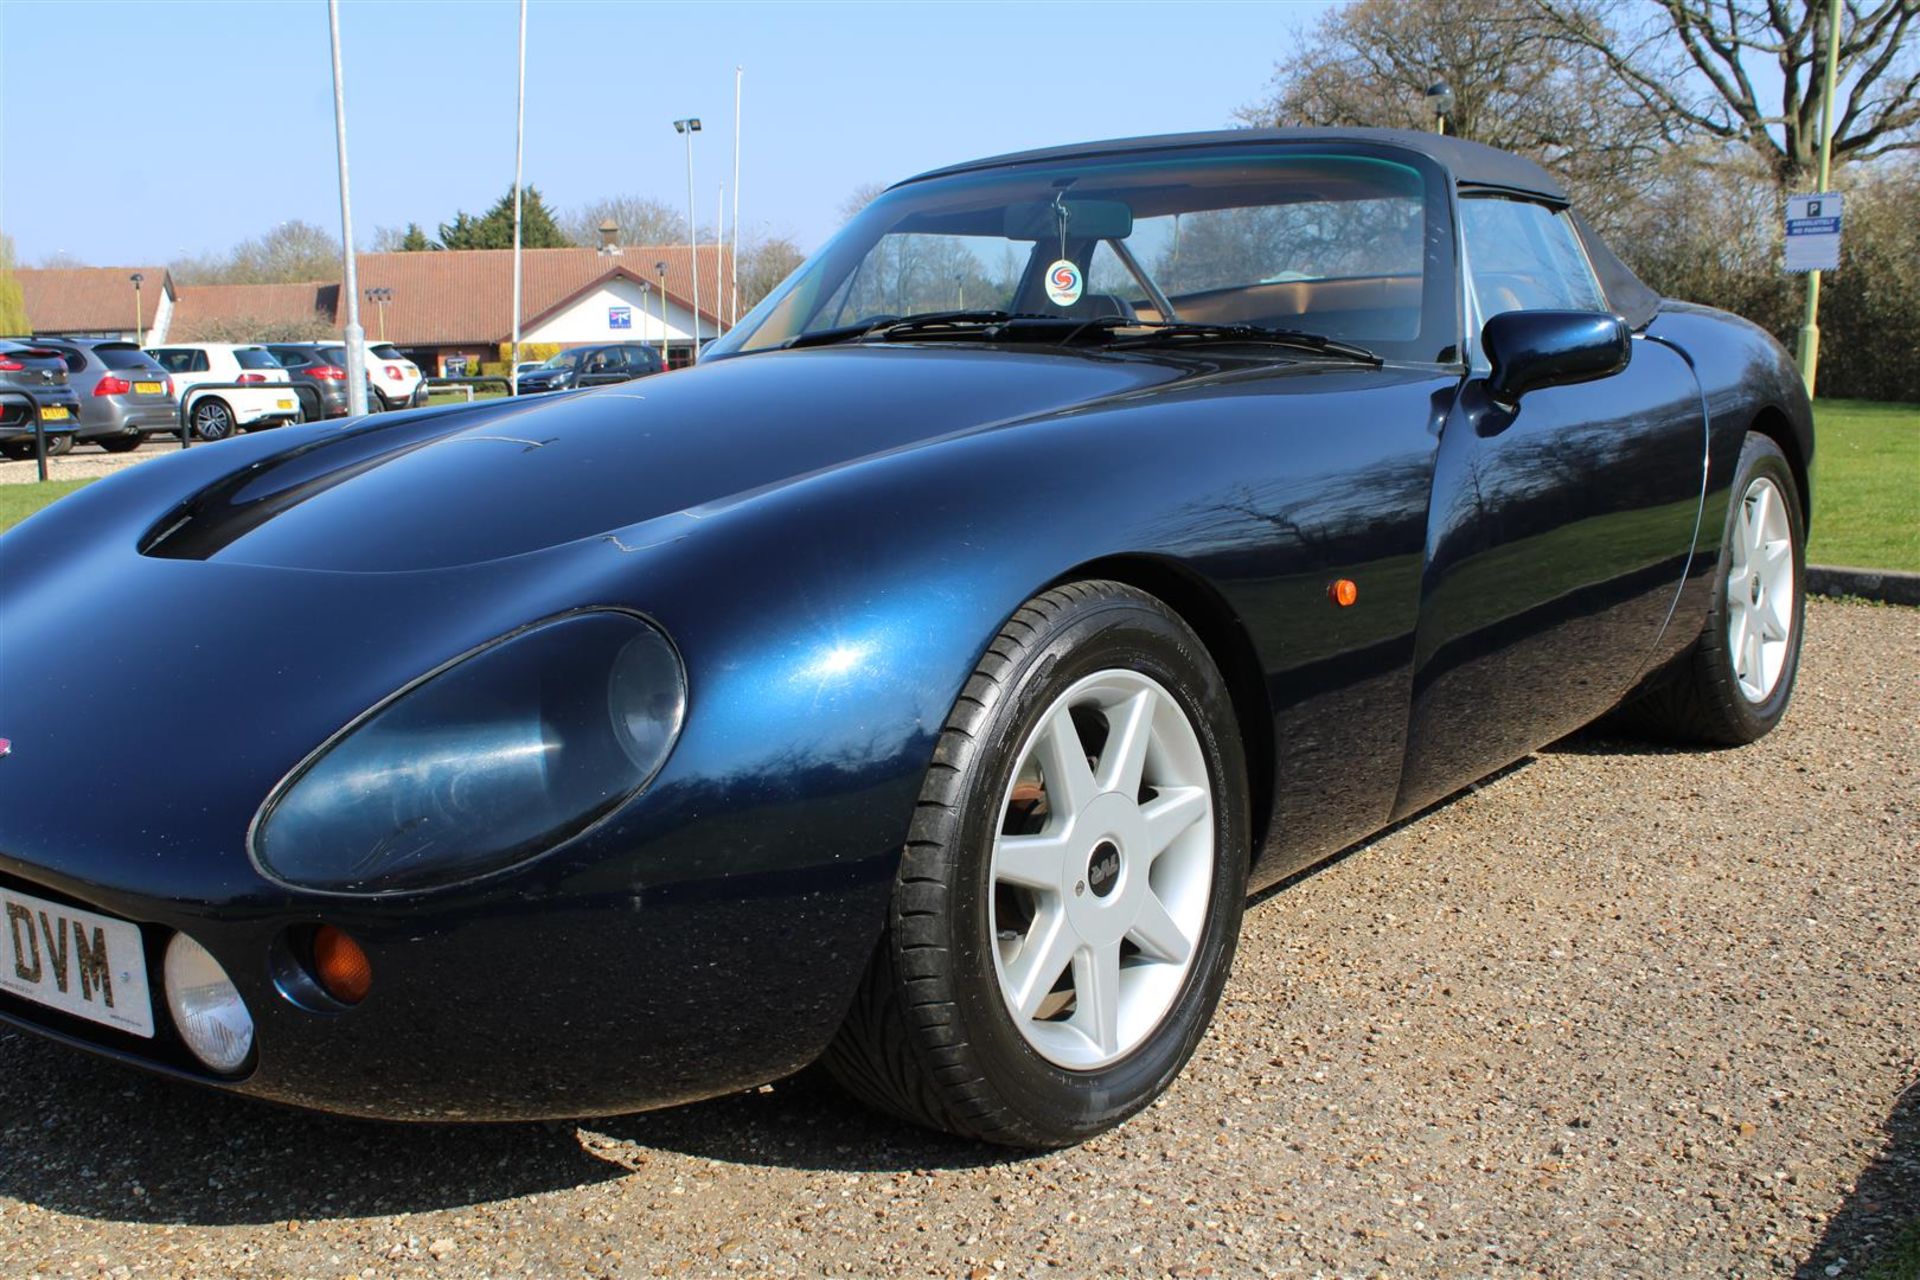 1993 TVR Griffith 500 - Image 10 of 19